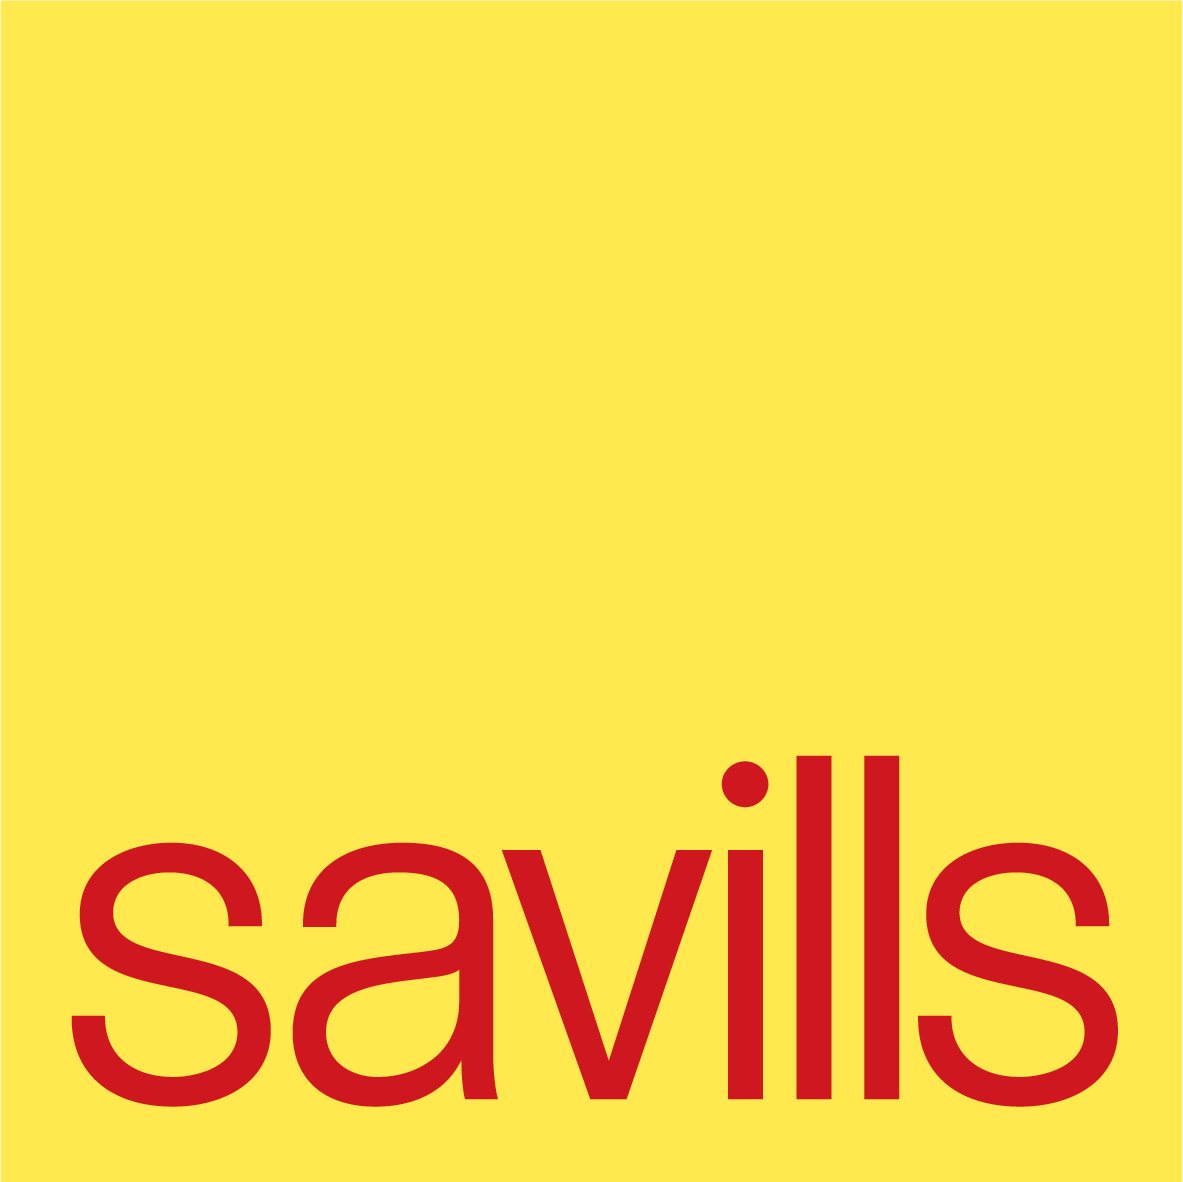 Savills has expanded its online flexible office listing platform and specialized advisory service to the U.S. West Coast markets. This extension follows the launch of Workthere in the Southeast in August and the North American debut in the Northeast in February of 2019.